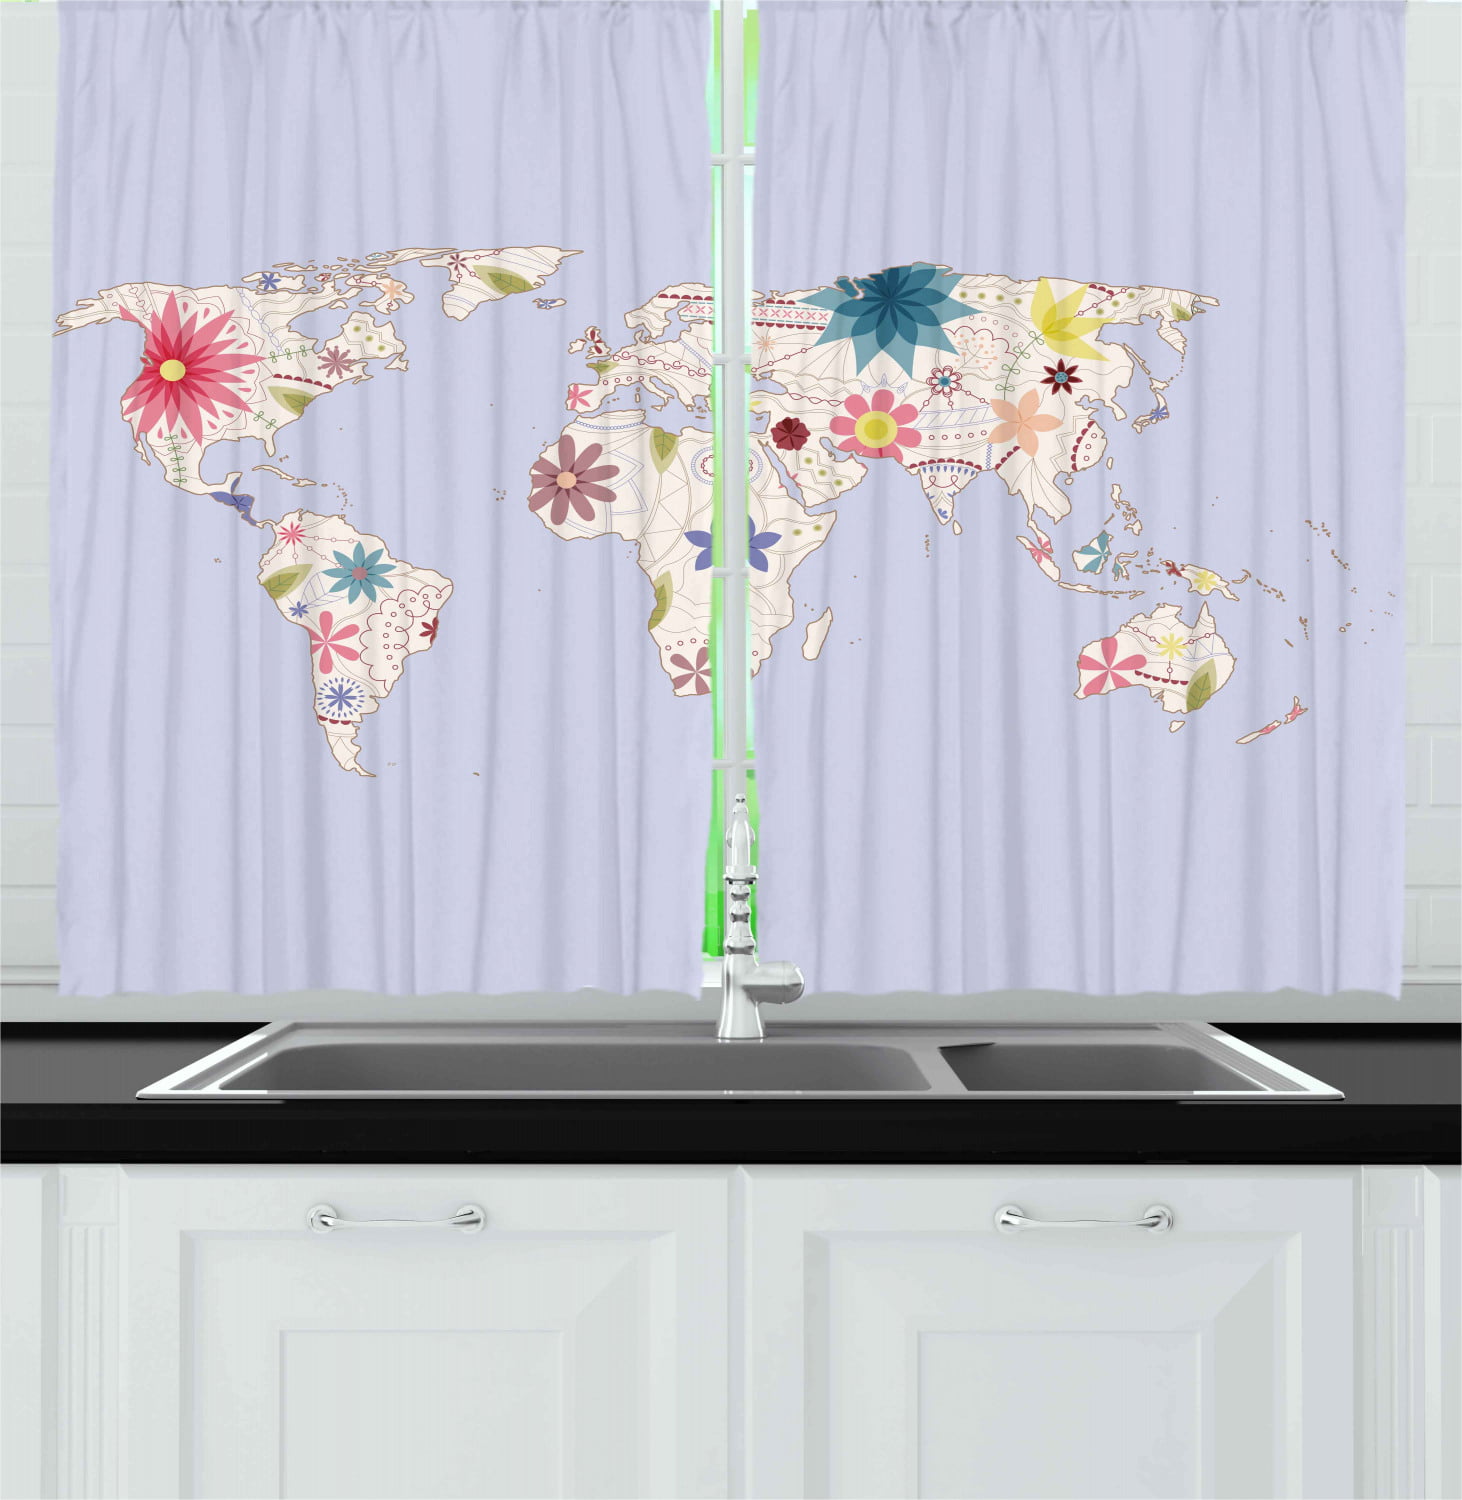 Funny World Map with Nut Kitchen Curtains Window Treatment Set 2 Panels 55x39" 